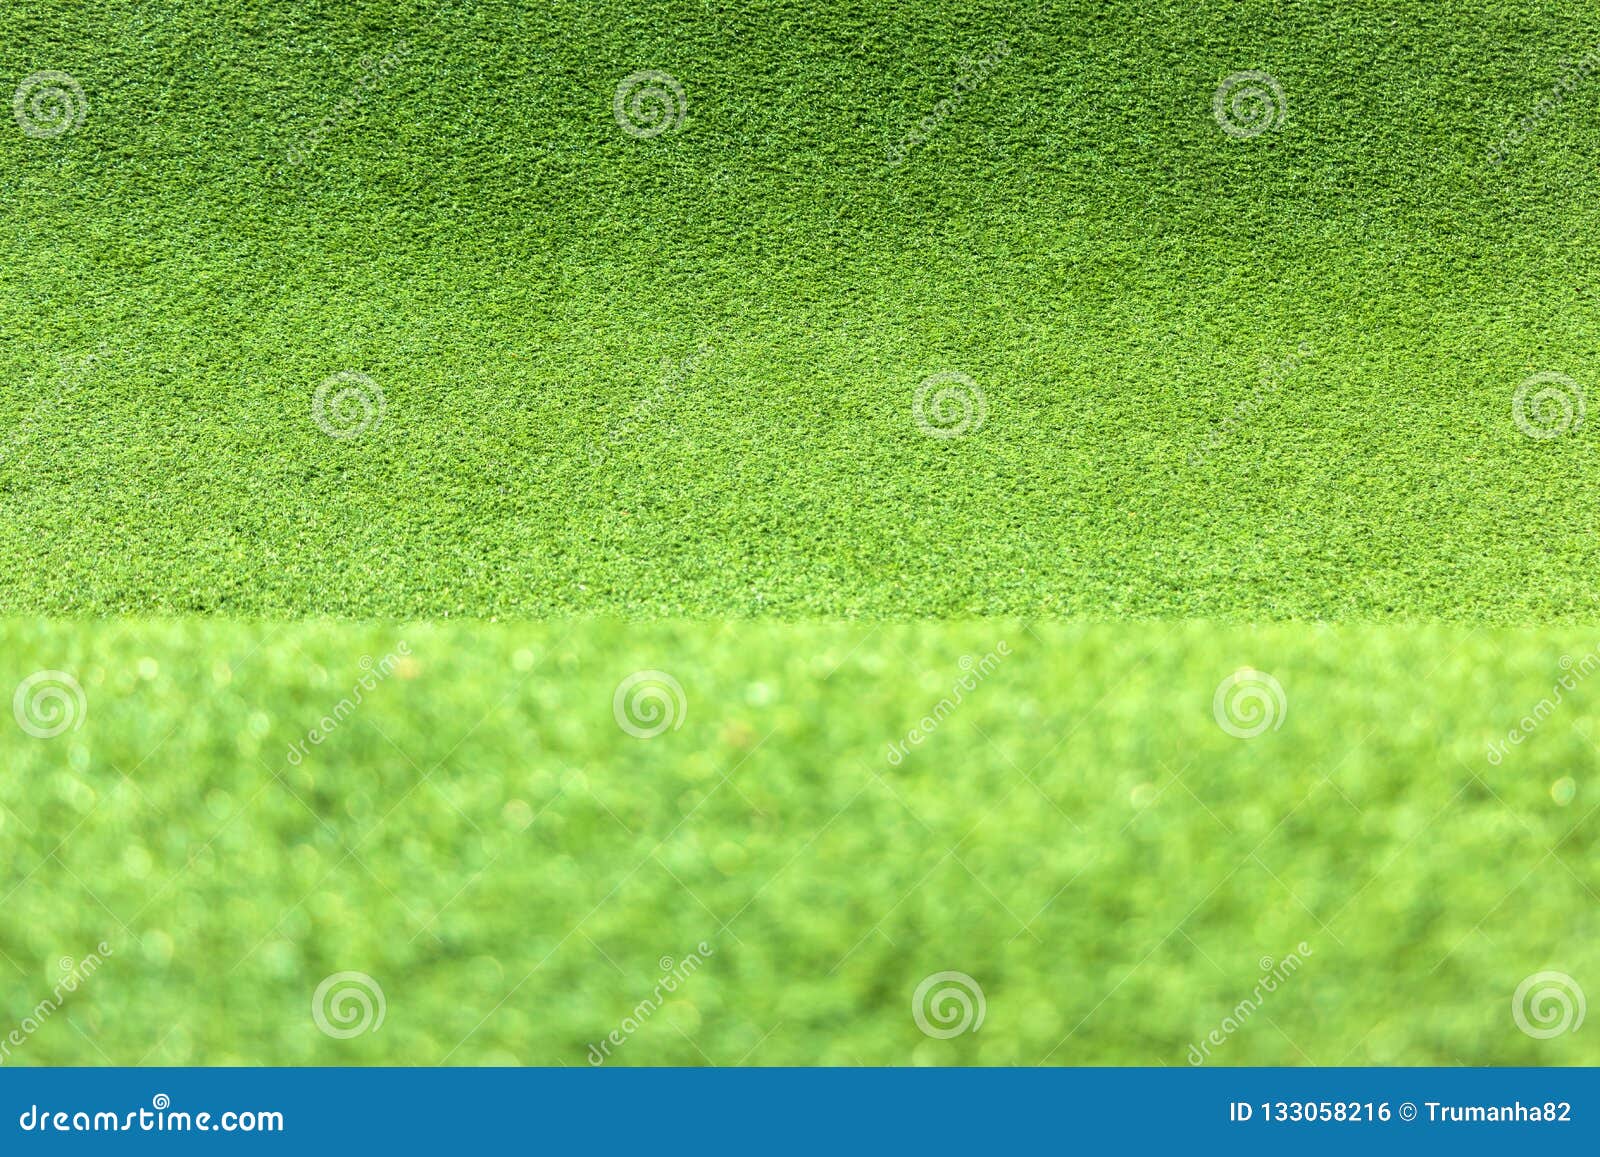 Green Grass Texture Carpet for Background Stock Photo - Image of